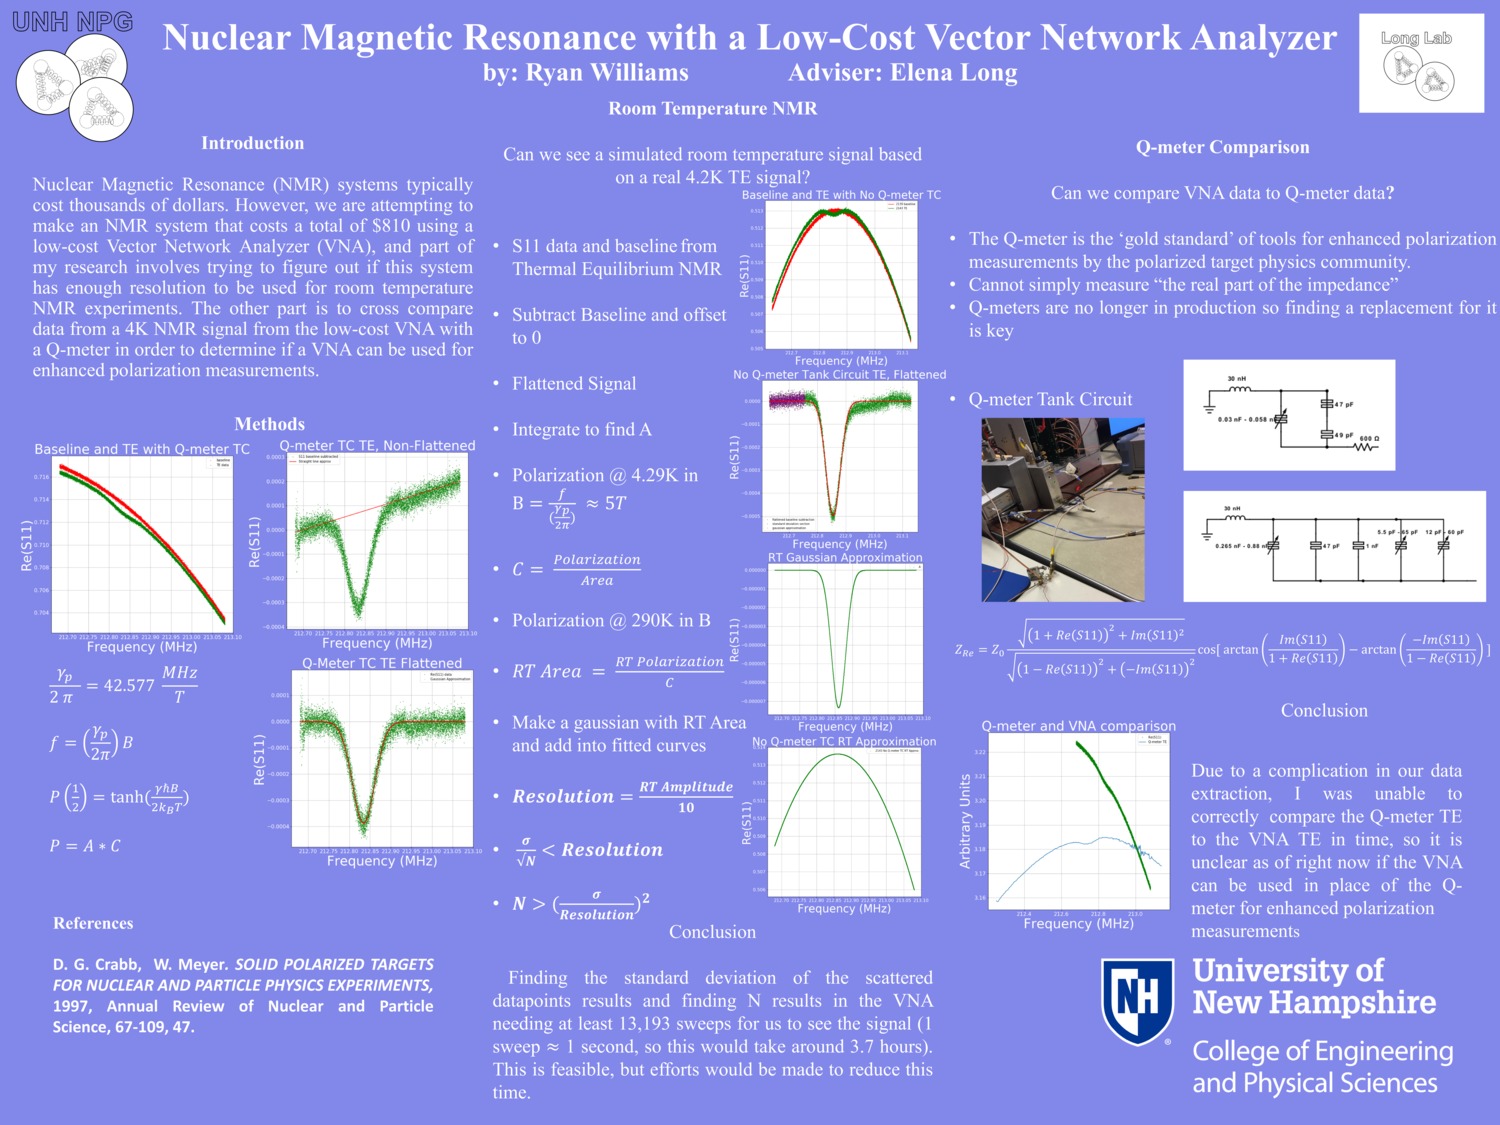 Nuclear Magnetic Resonance With A Low-Cost Vector Network Analyzer by rw1049